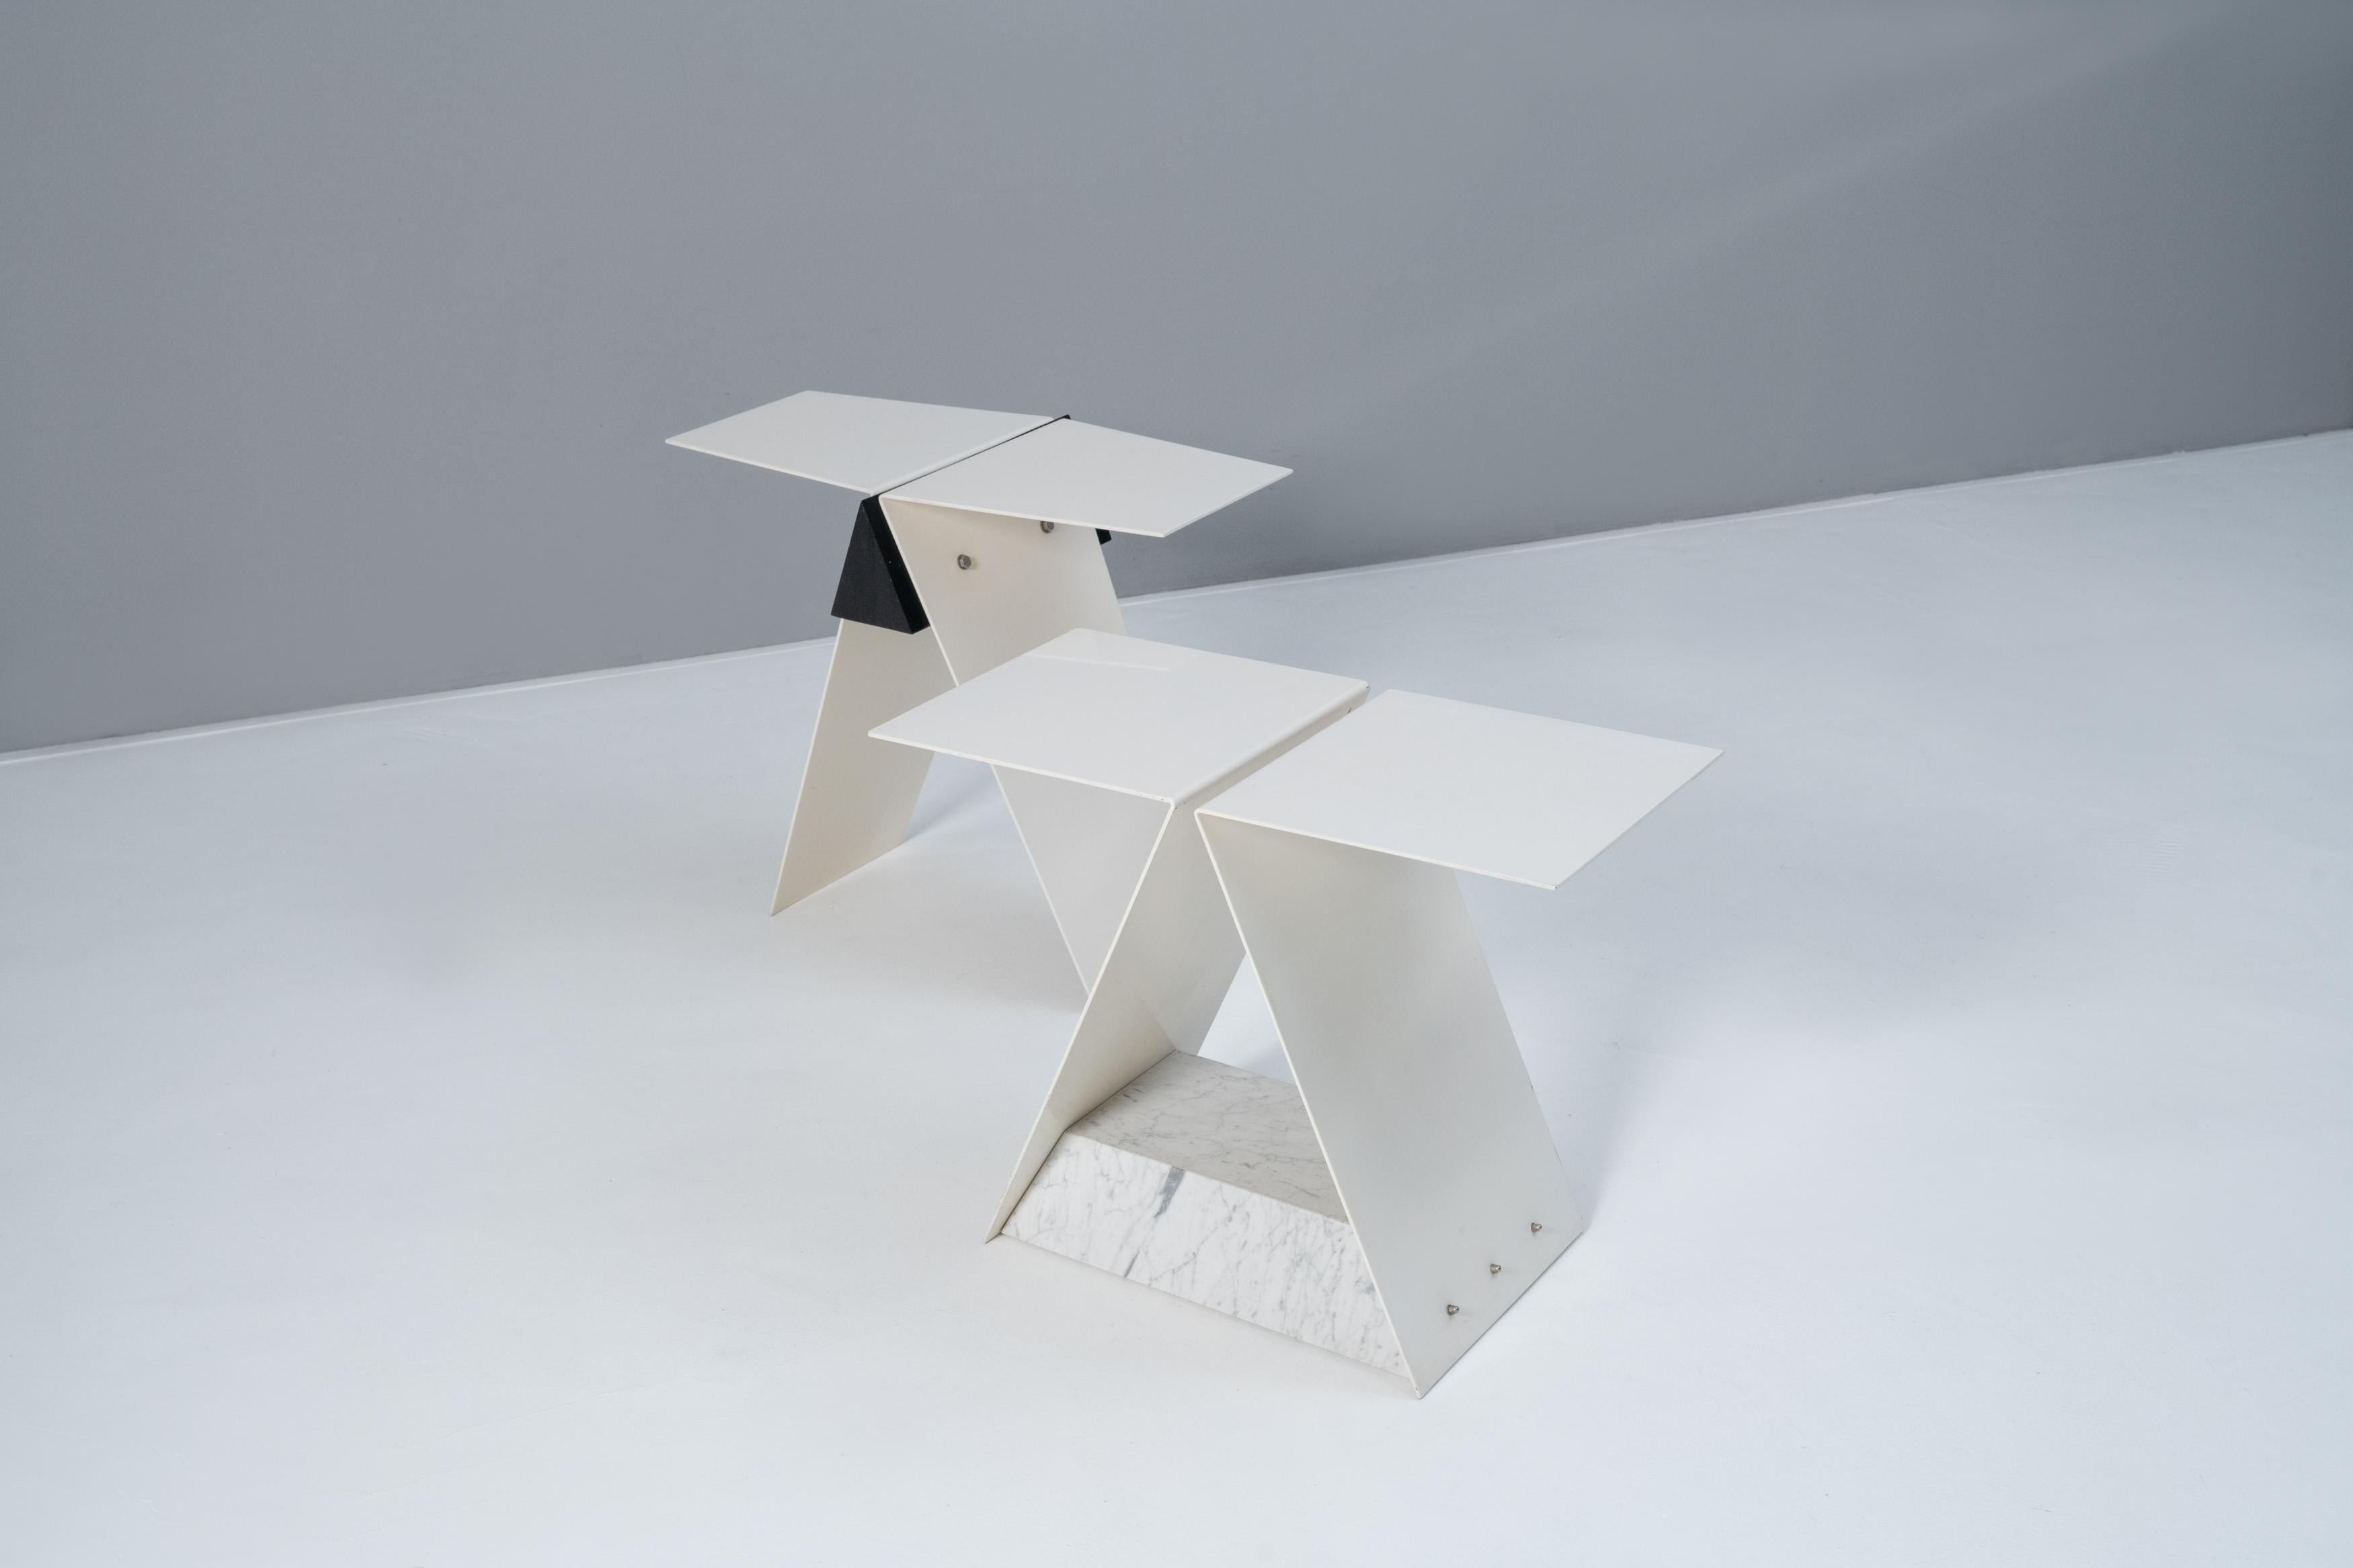 Two tables by Manfred Billinger in white lacquered steel and marble. Each marked with a metal plaque: M. Billinger 1983.

Provenance: Art collection Peter Schenning / Goslar
Similar in materiality and lines, but different in form, the two tables by